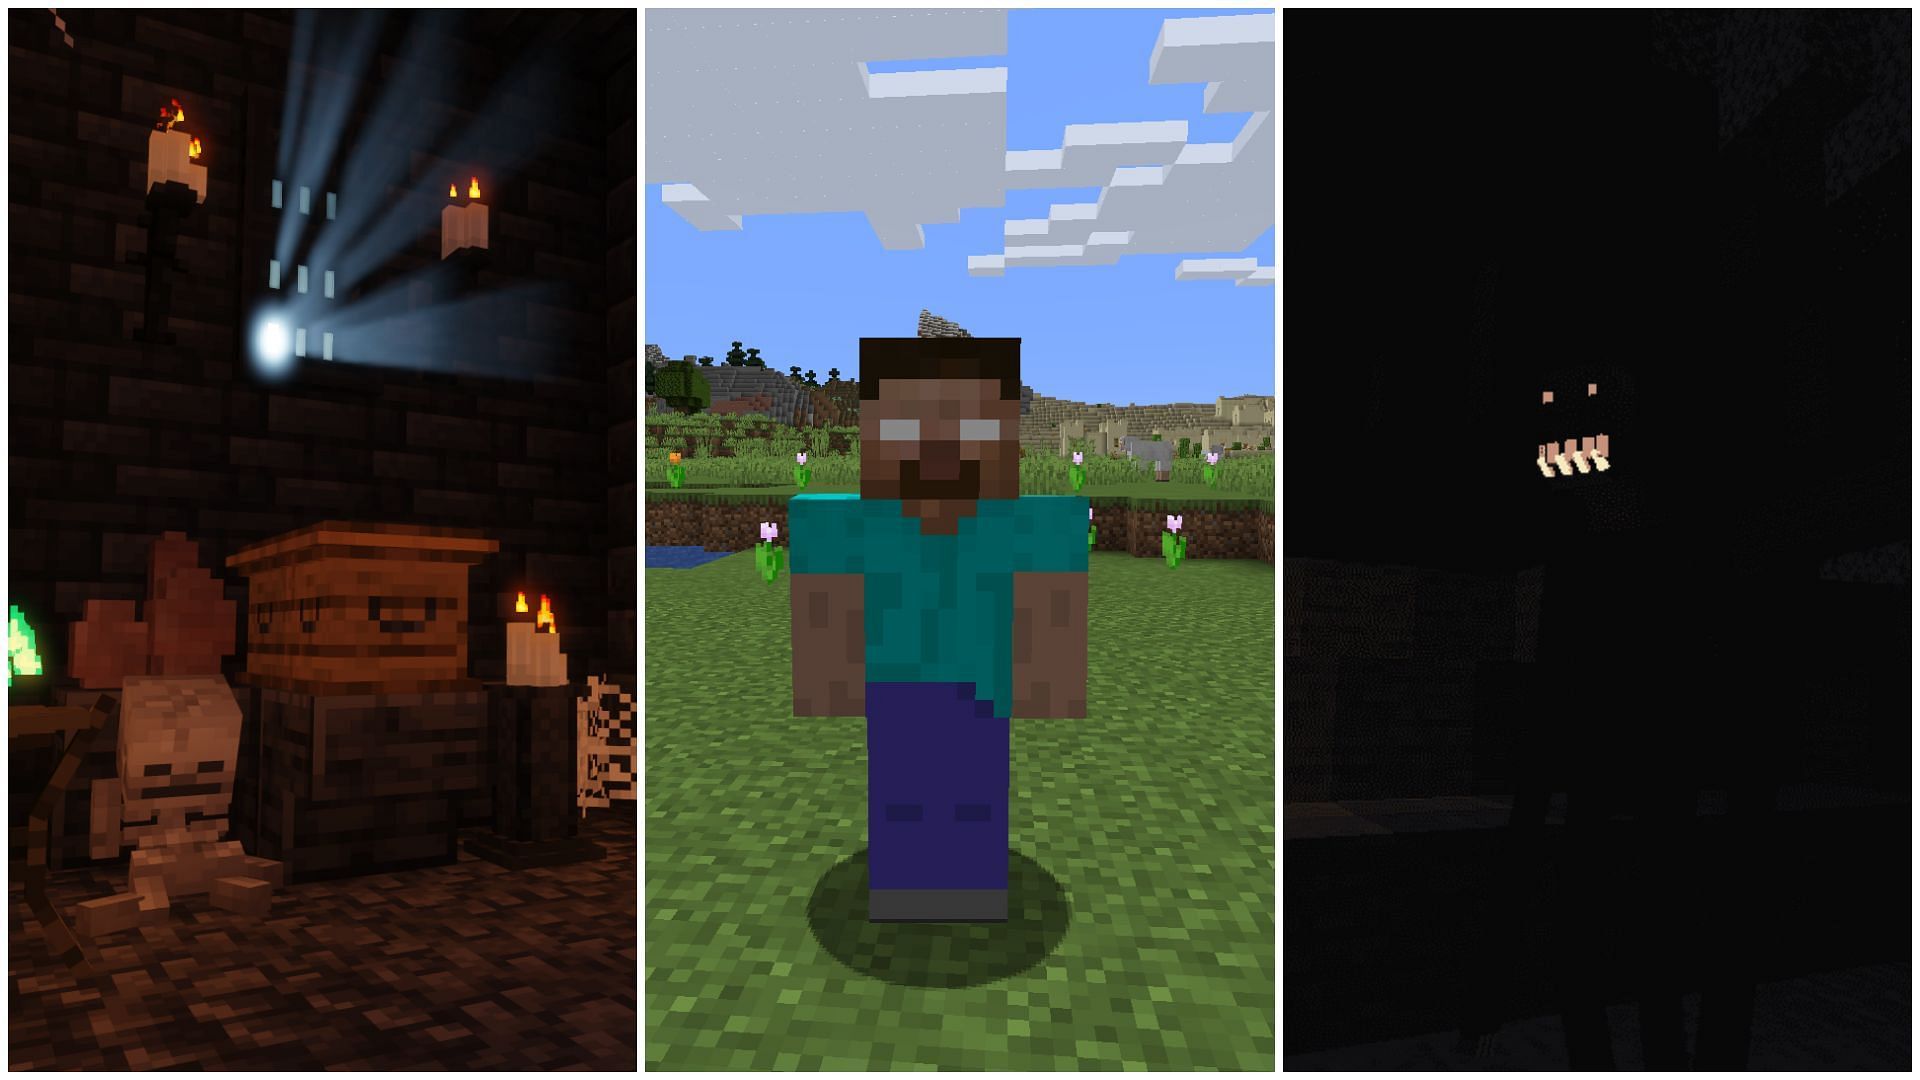 Players can download some extremely scary mods for Minecraft this Halloween (Image via Sportskeeda)